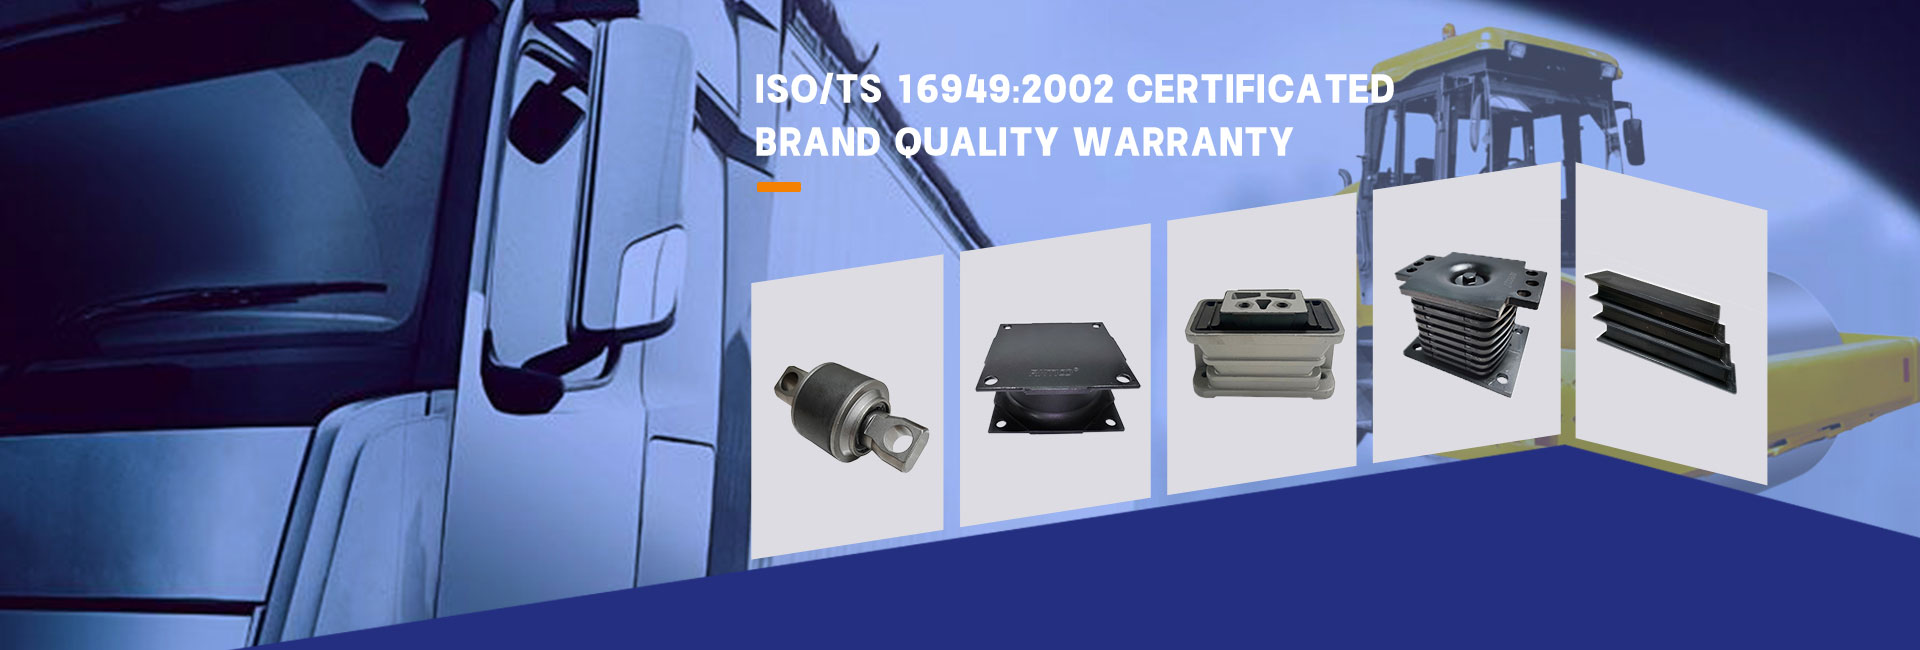 RNTICO has the ISO9001-2000, ISO/TS16949-2002 quality certification